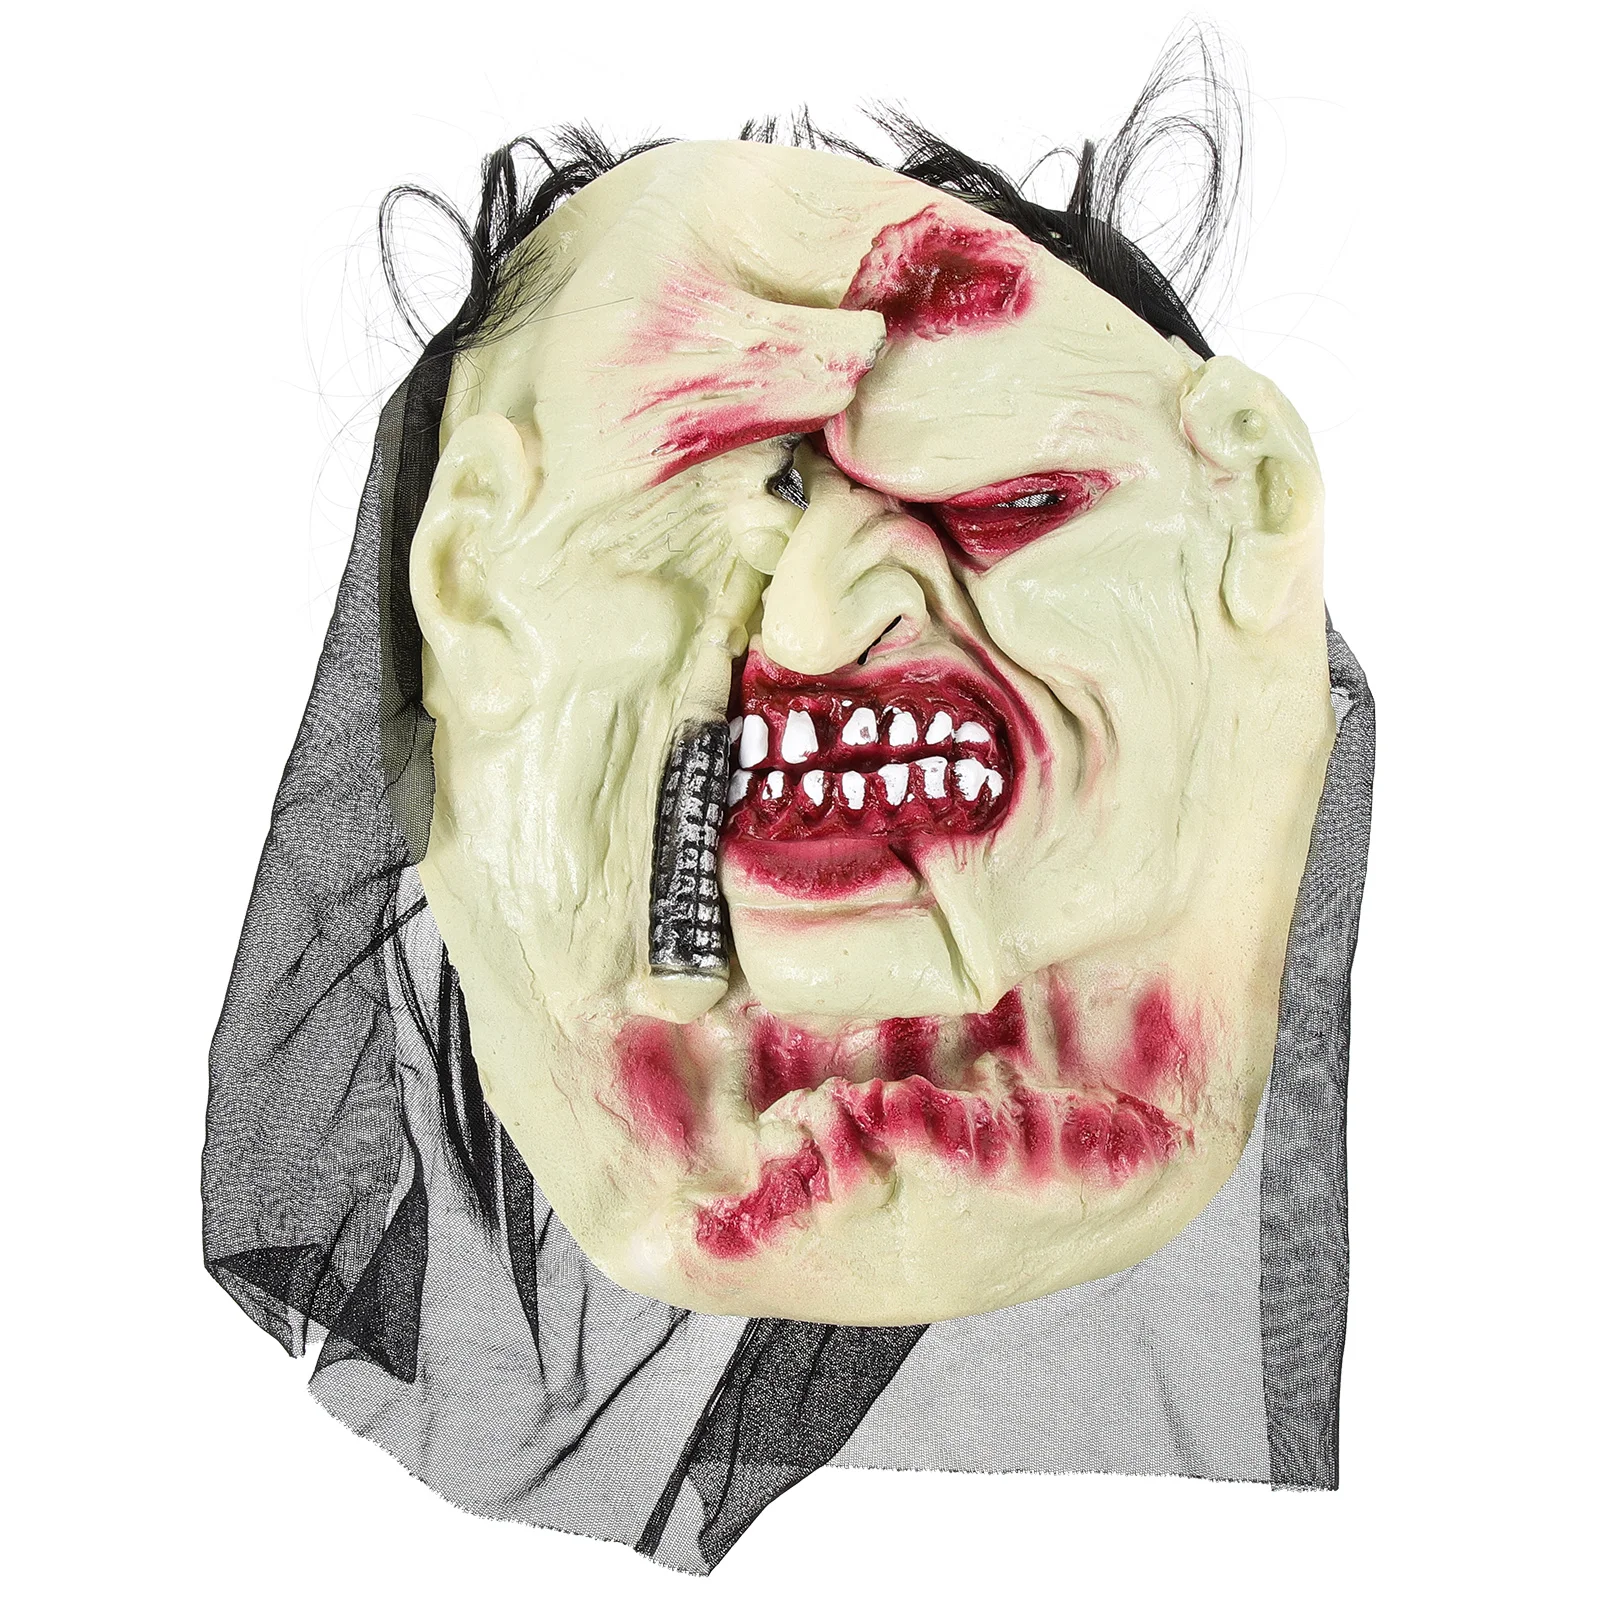 

Creep Cosplay Mask Halloween Costume Party Scary Haunted House Prop Masks Adults Realistic Horrible